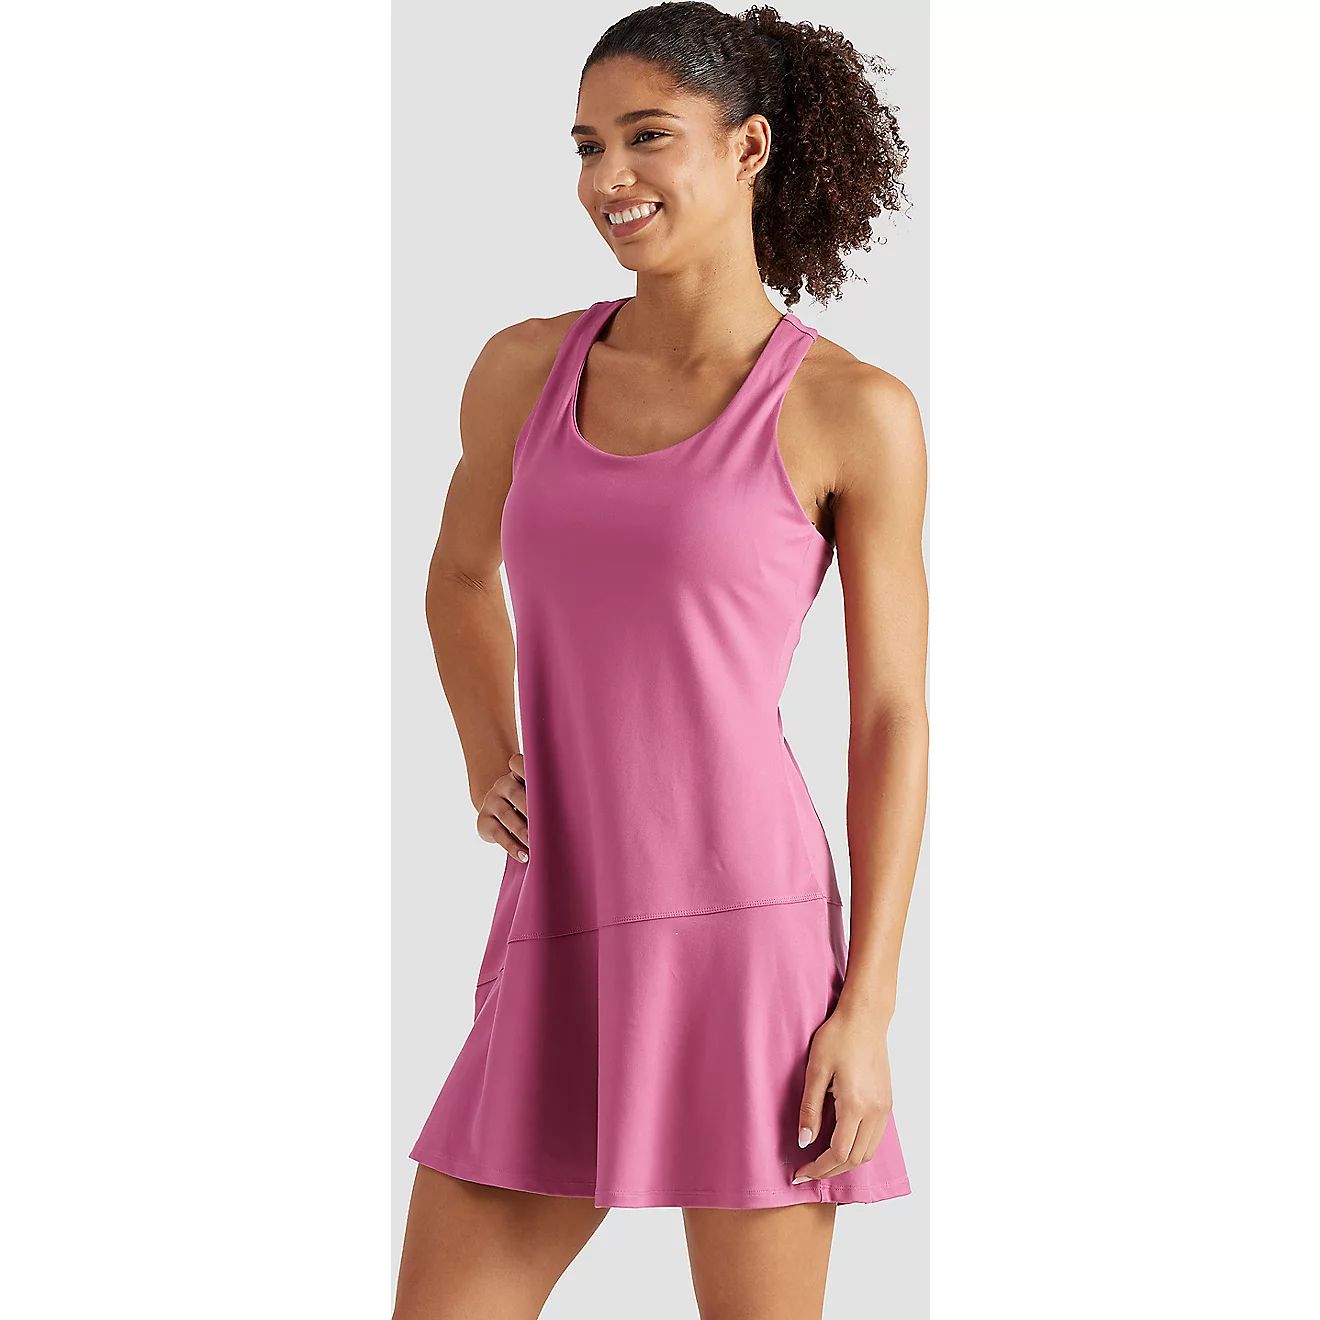 Freely Women's Jacie Dress | Free Shipping at Academy | Academy Sports + Outdoors